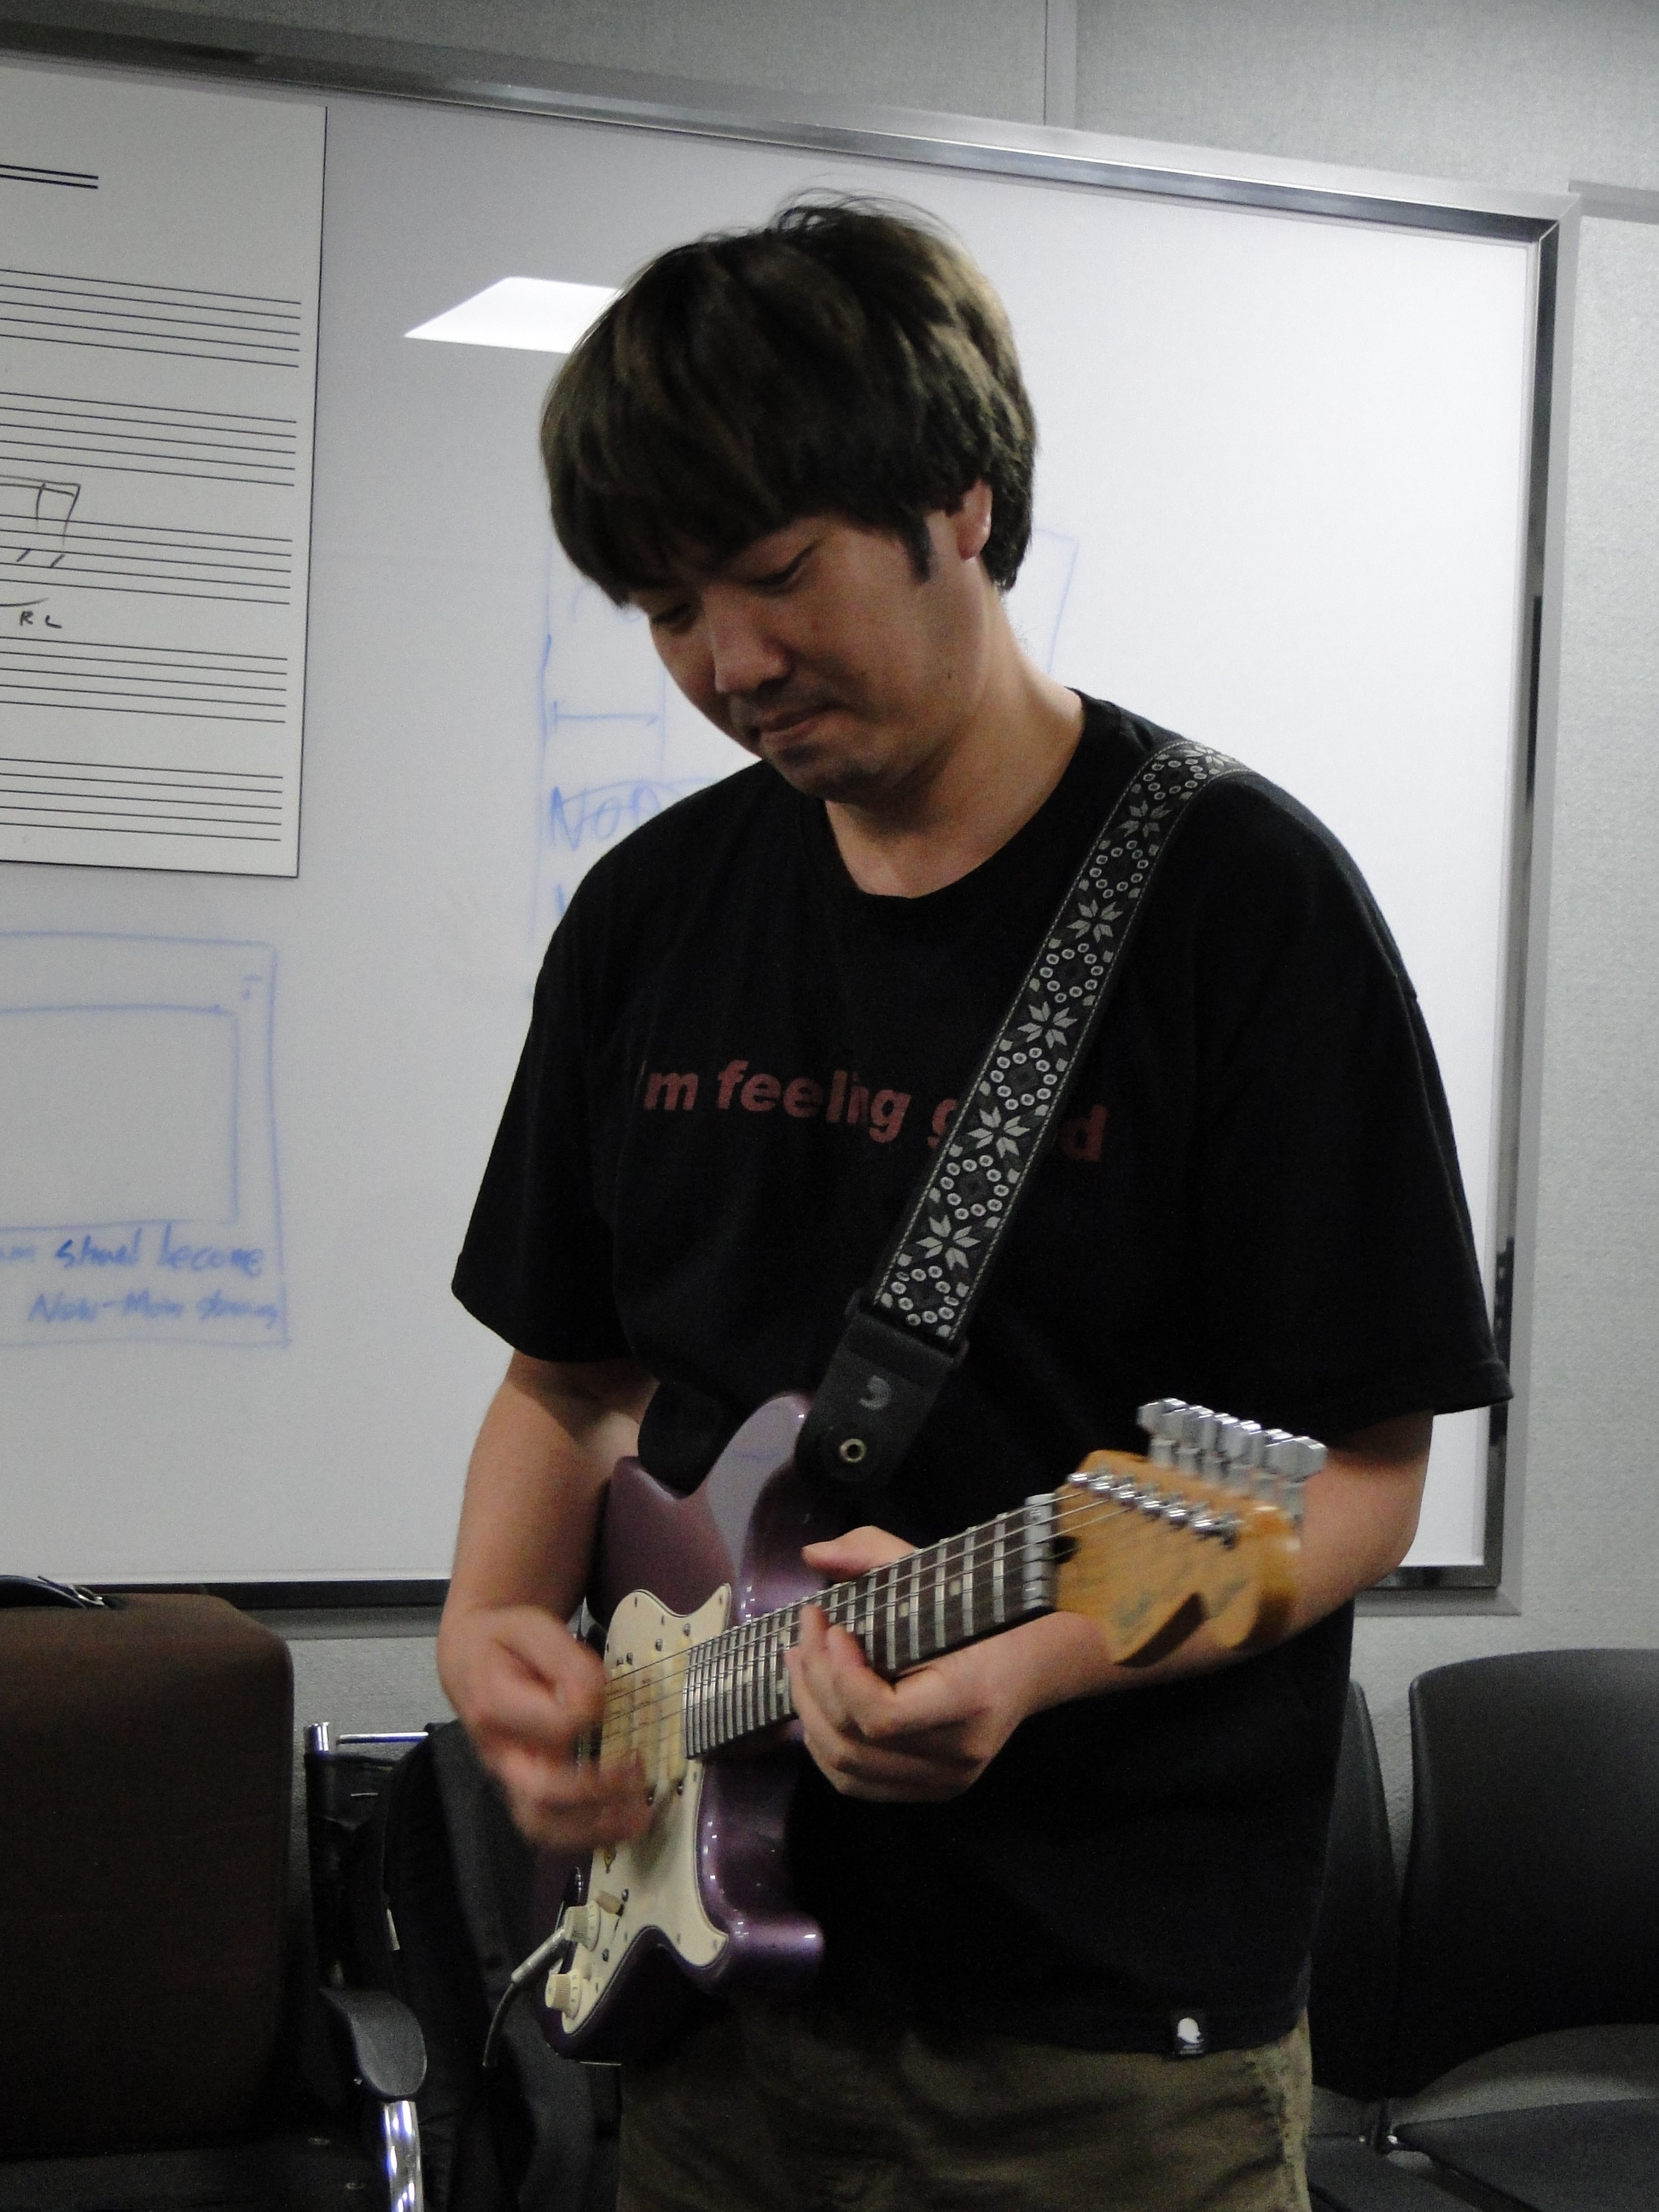  Department of Jazz and Contemporary Music Seoul Digital University